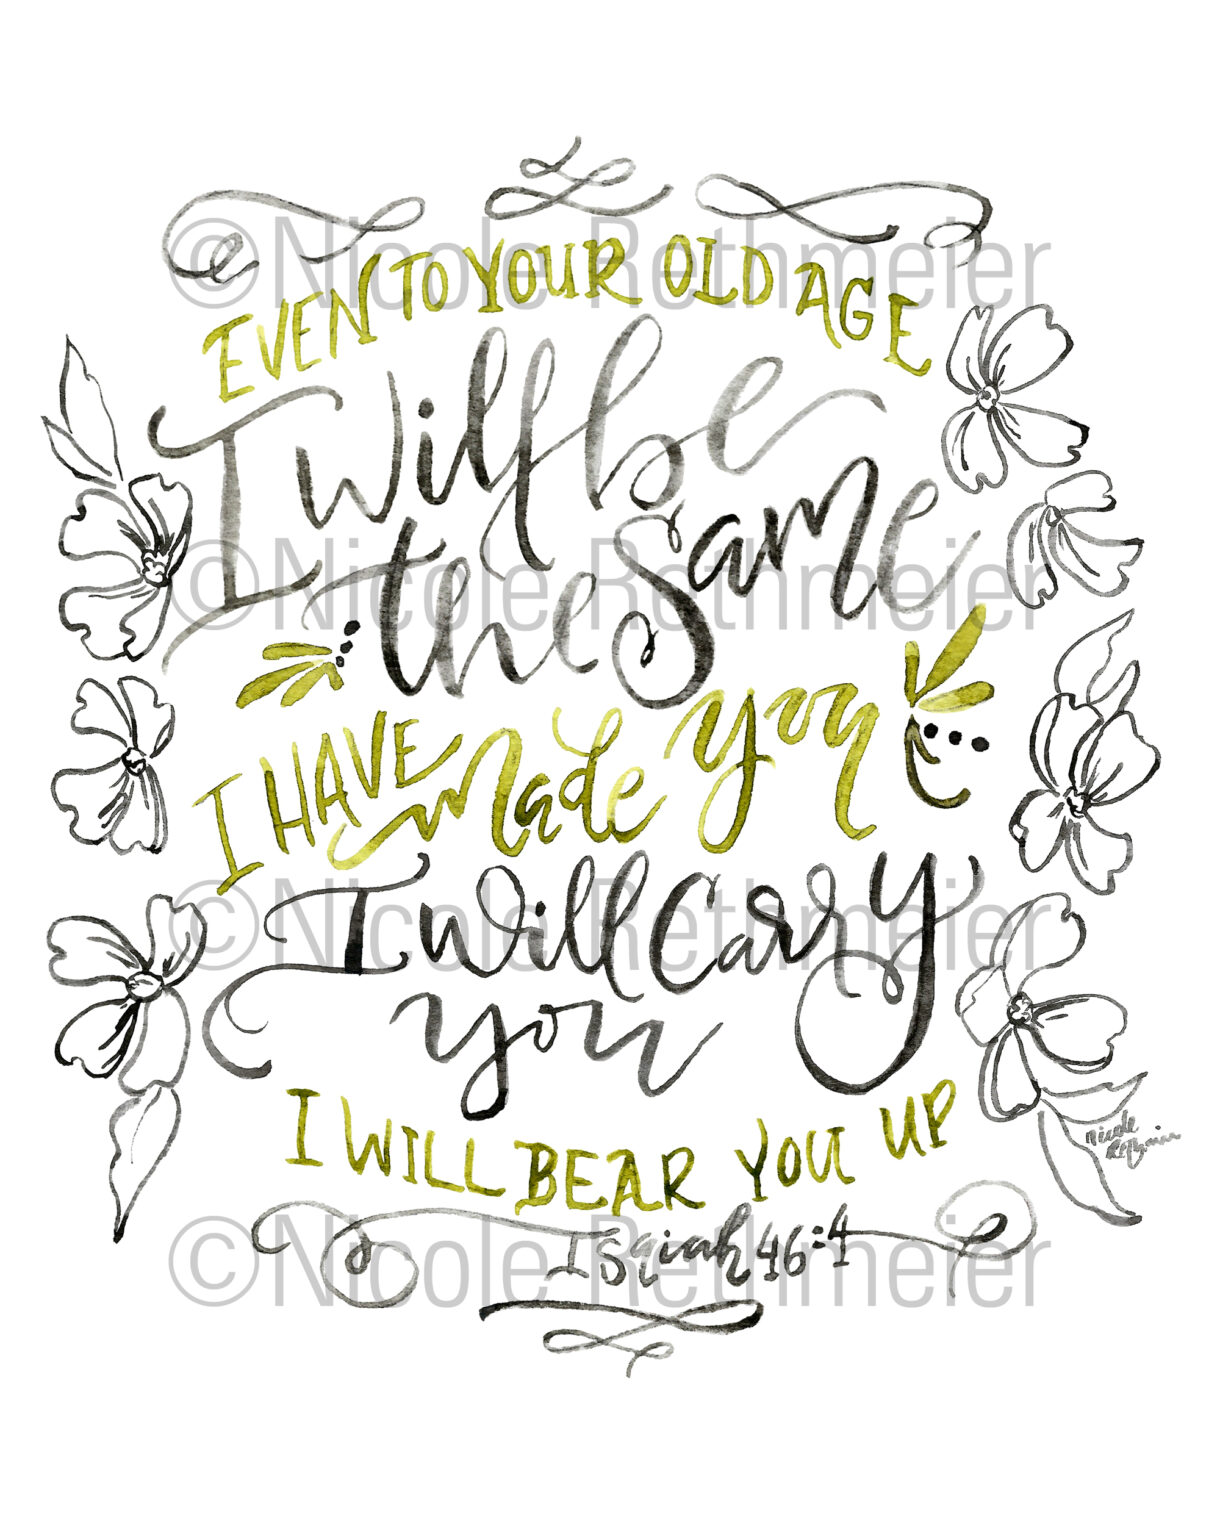 I Will Be The Same, I Will Carry You, Bible verse Watercolor handlettering - Isaiah 46:4